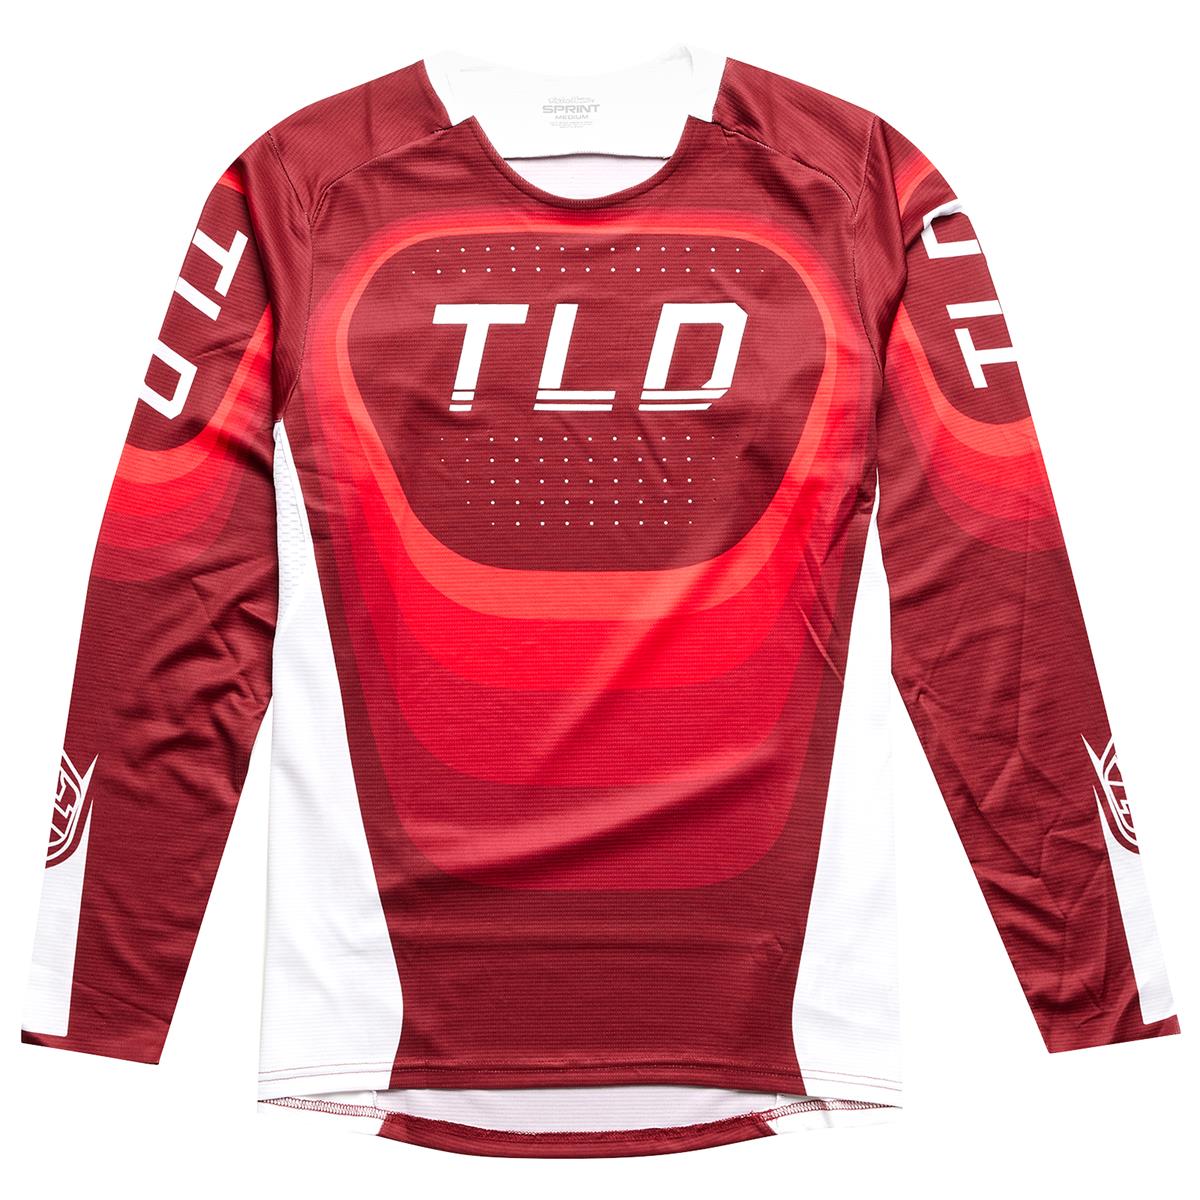 Troy Lee Designs Maillot VTT manches longues Sprint Reverb - Race Red